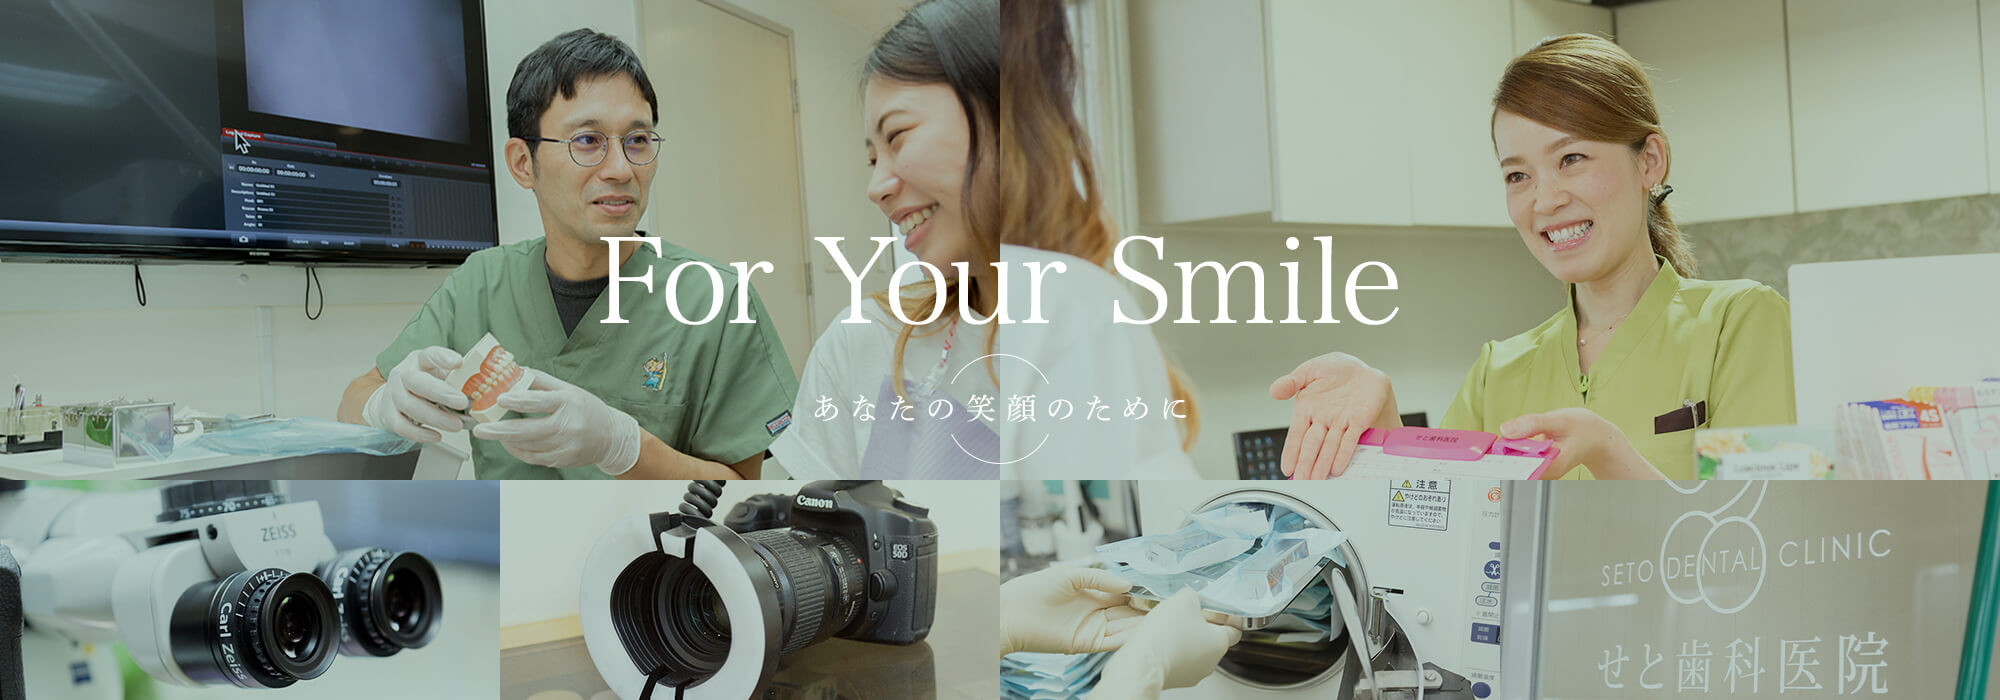 For Your Smile あなたの笑顔のために